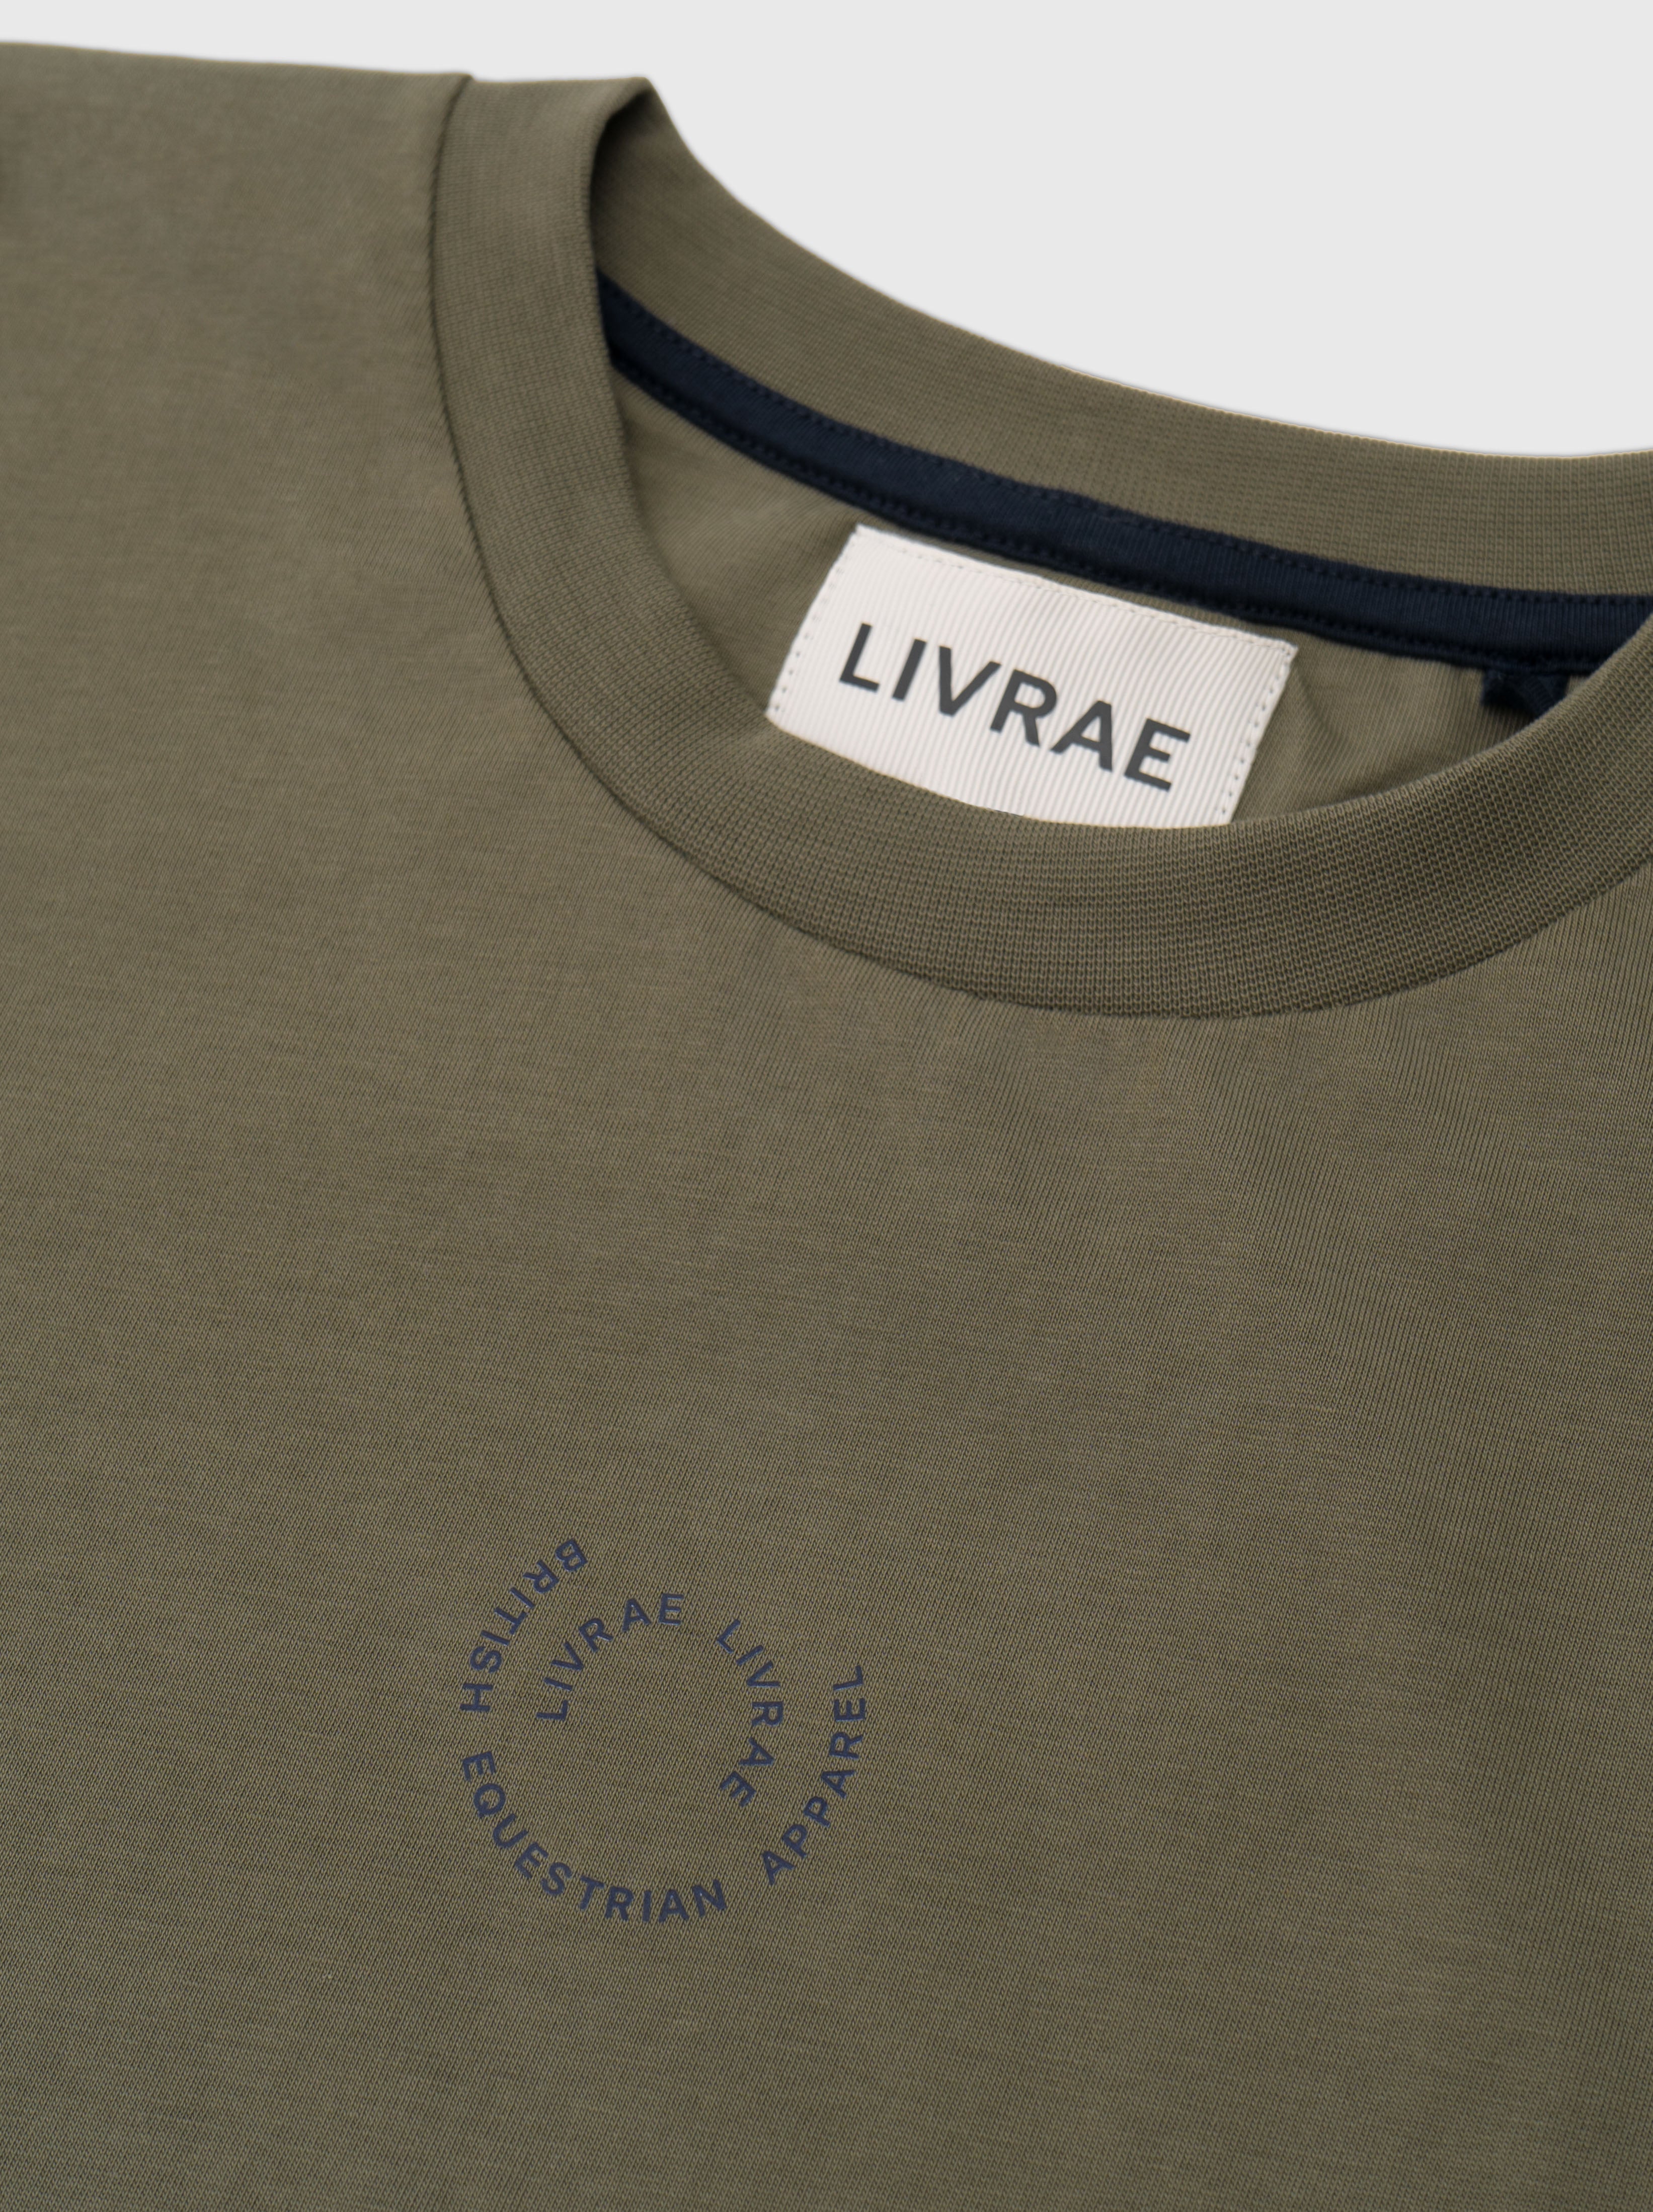 Everyday T-Shirt - Dusty Olive